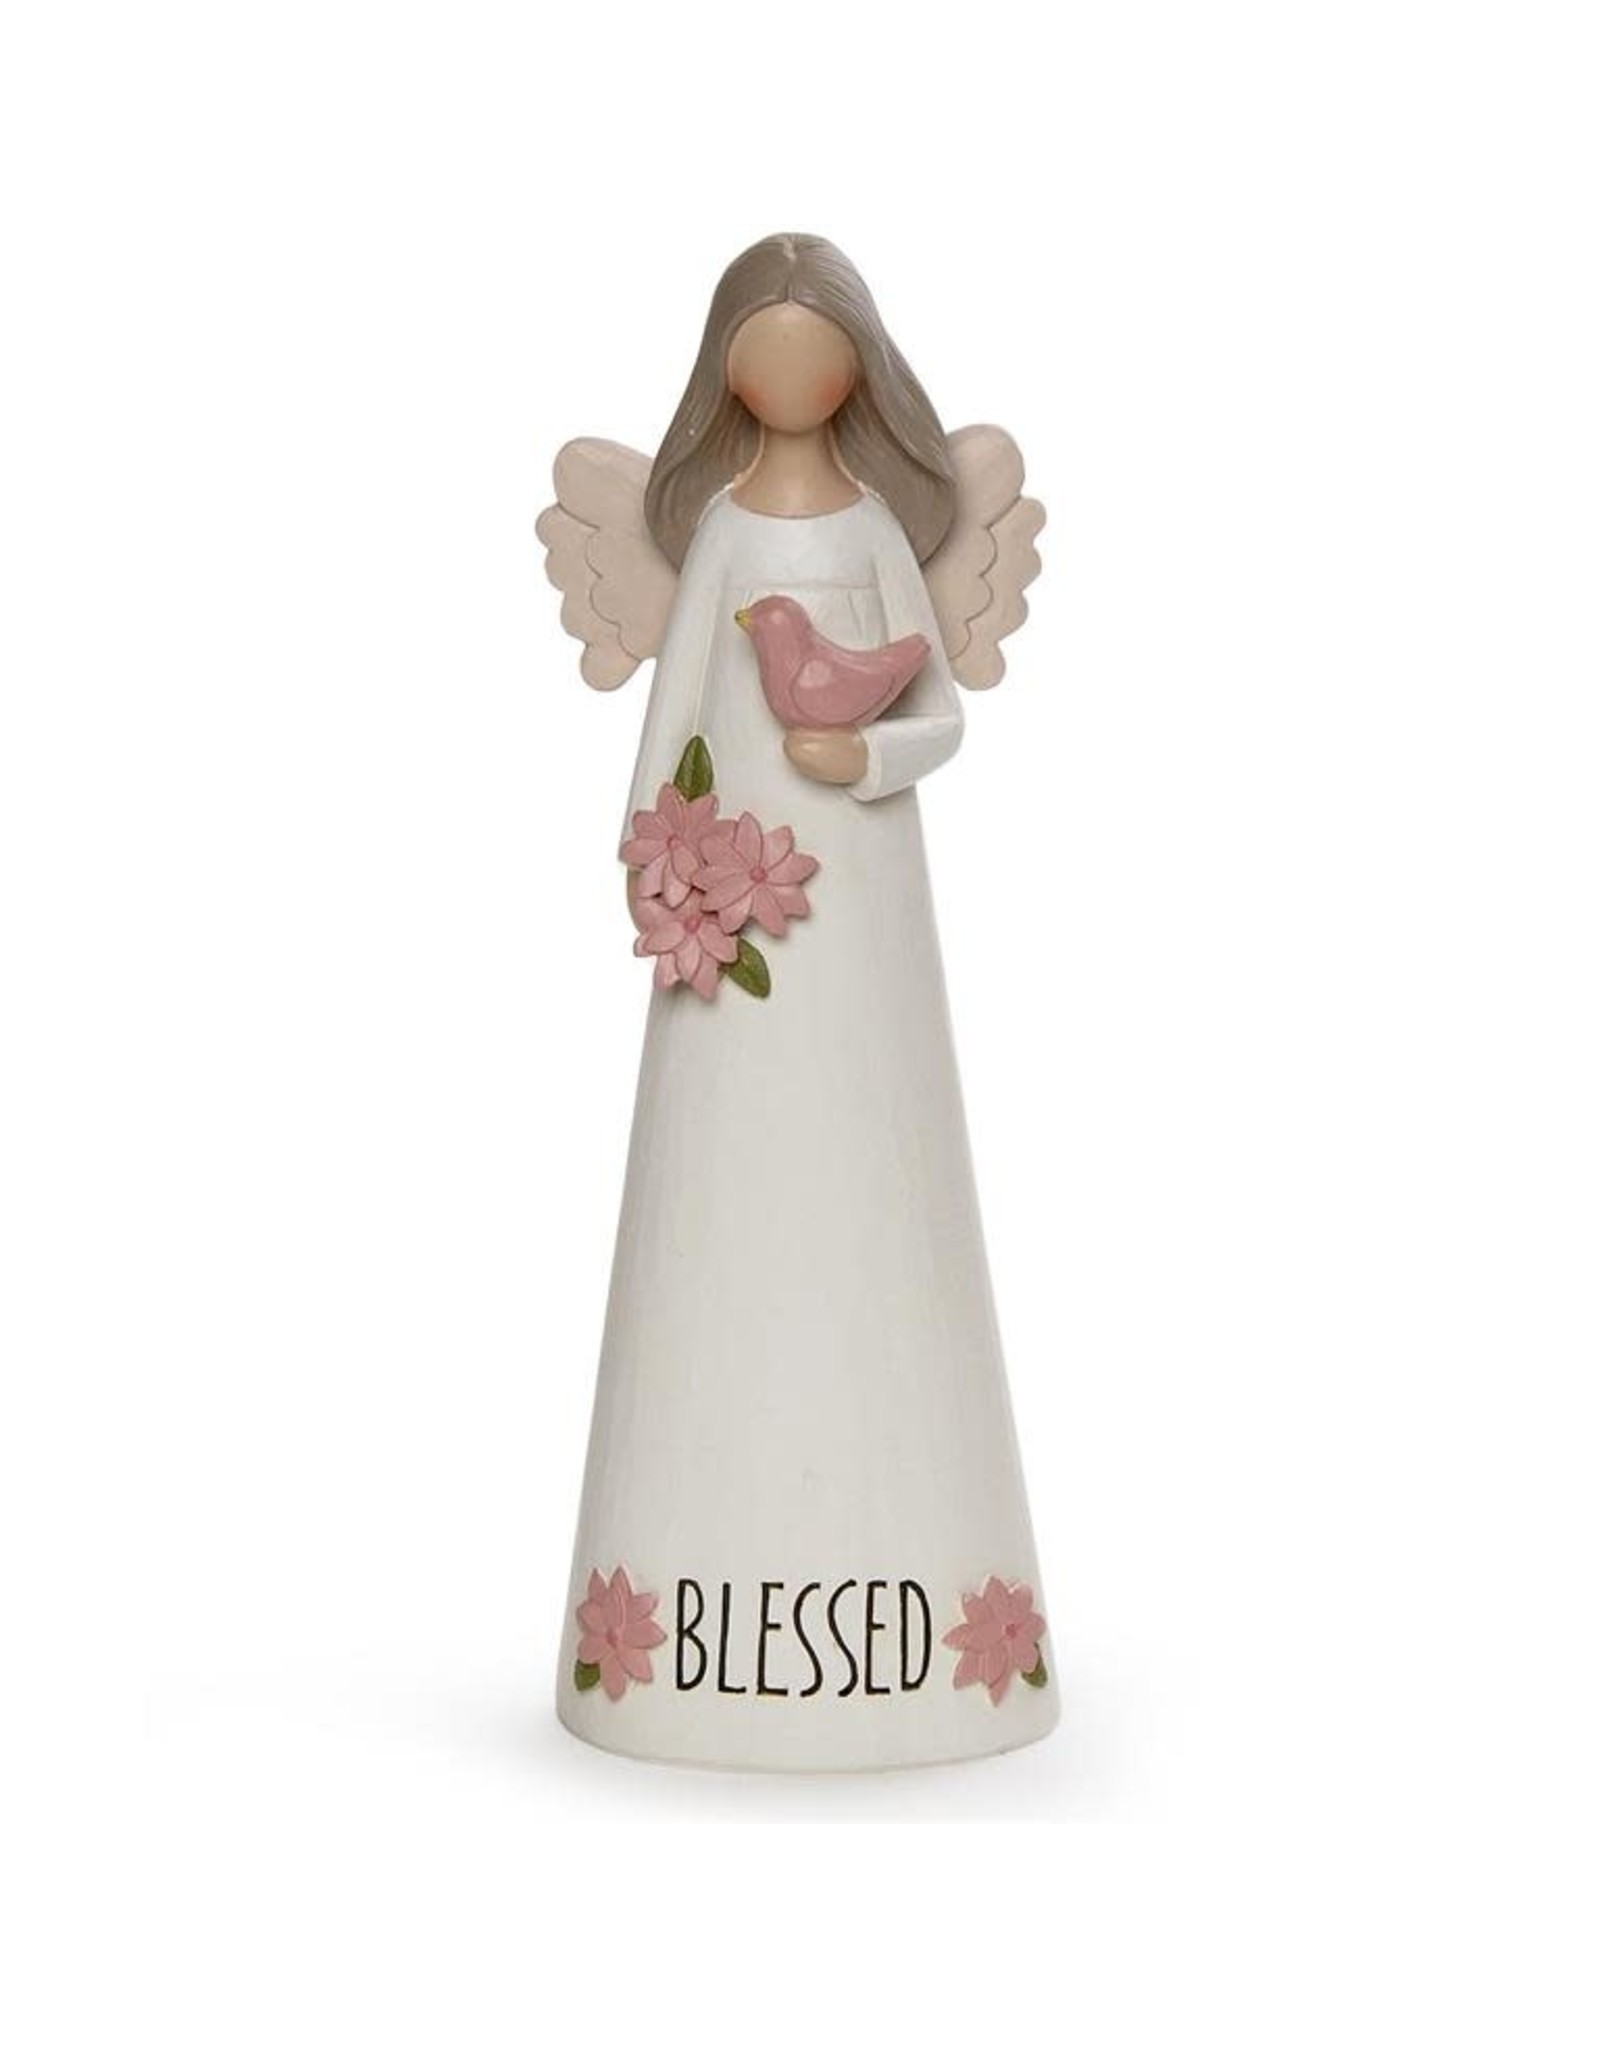 Angel Figurine - "Blessed" (with Bird)